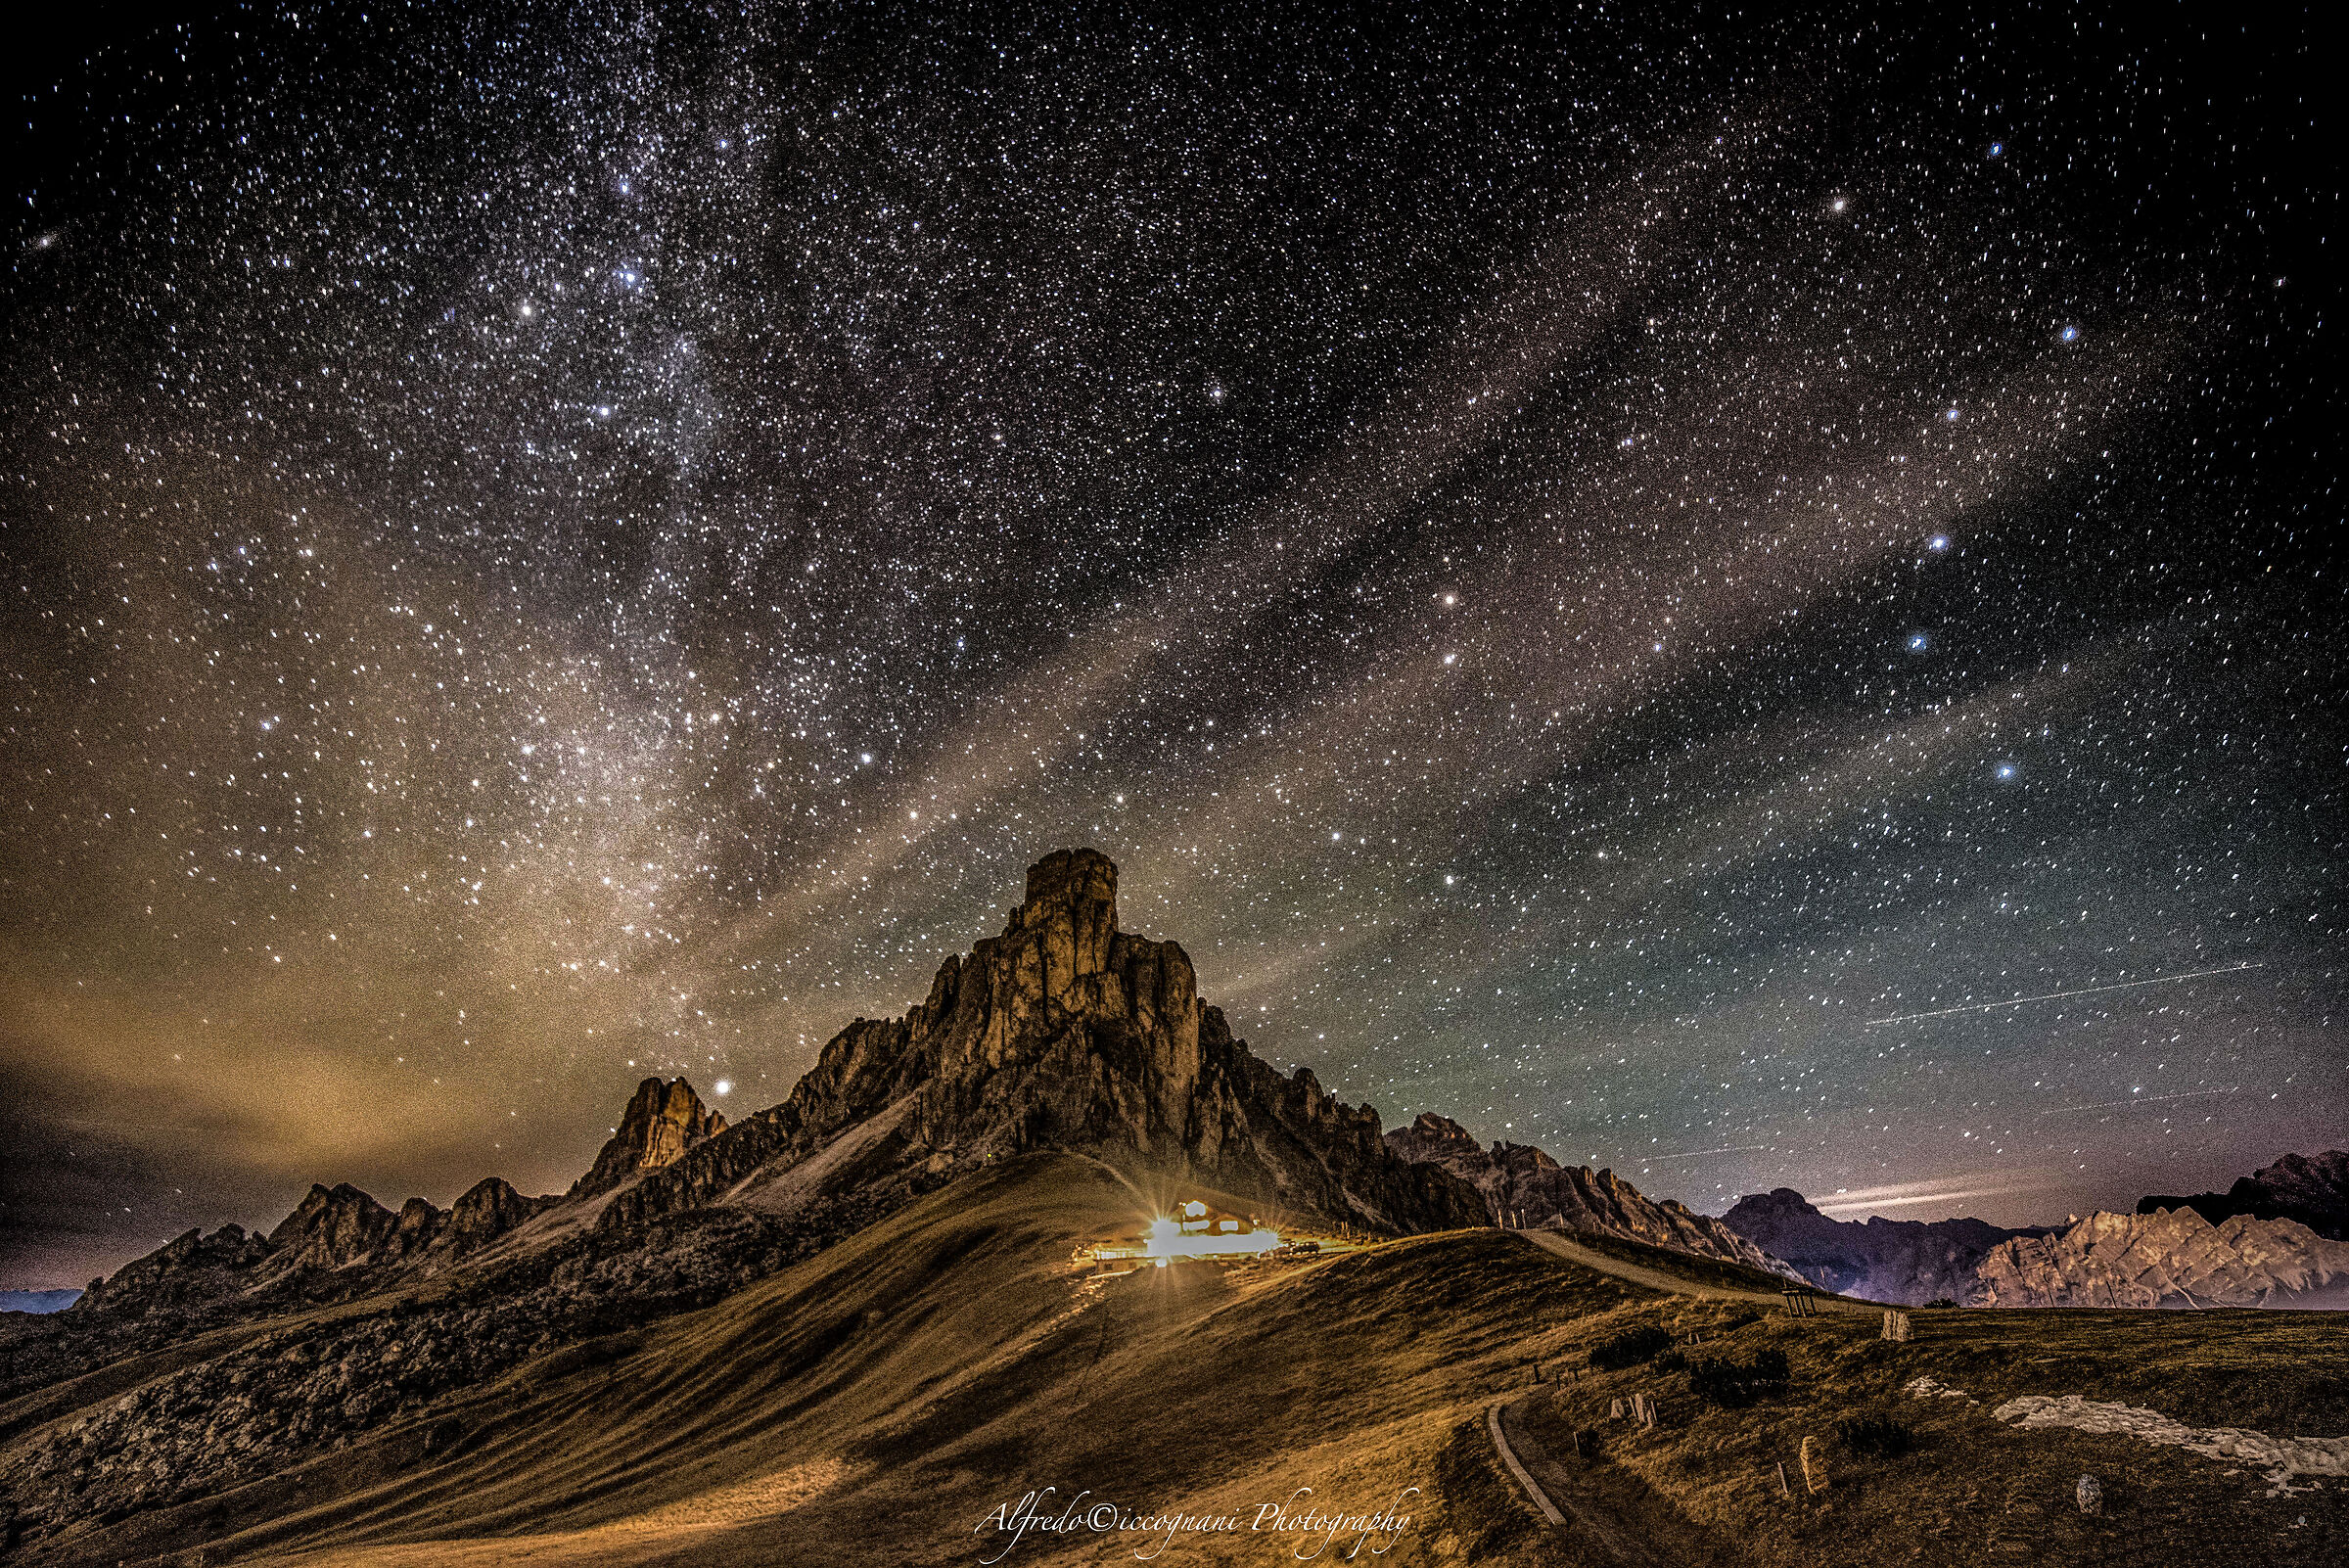 The Nuvolau mountain surrounded by stars...